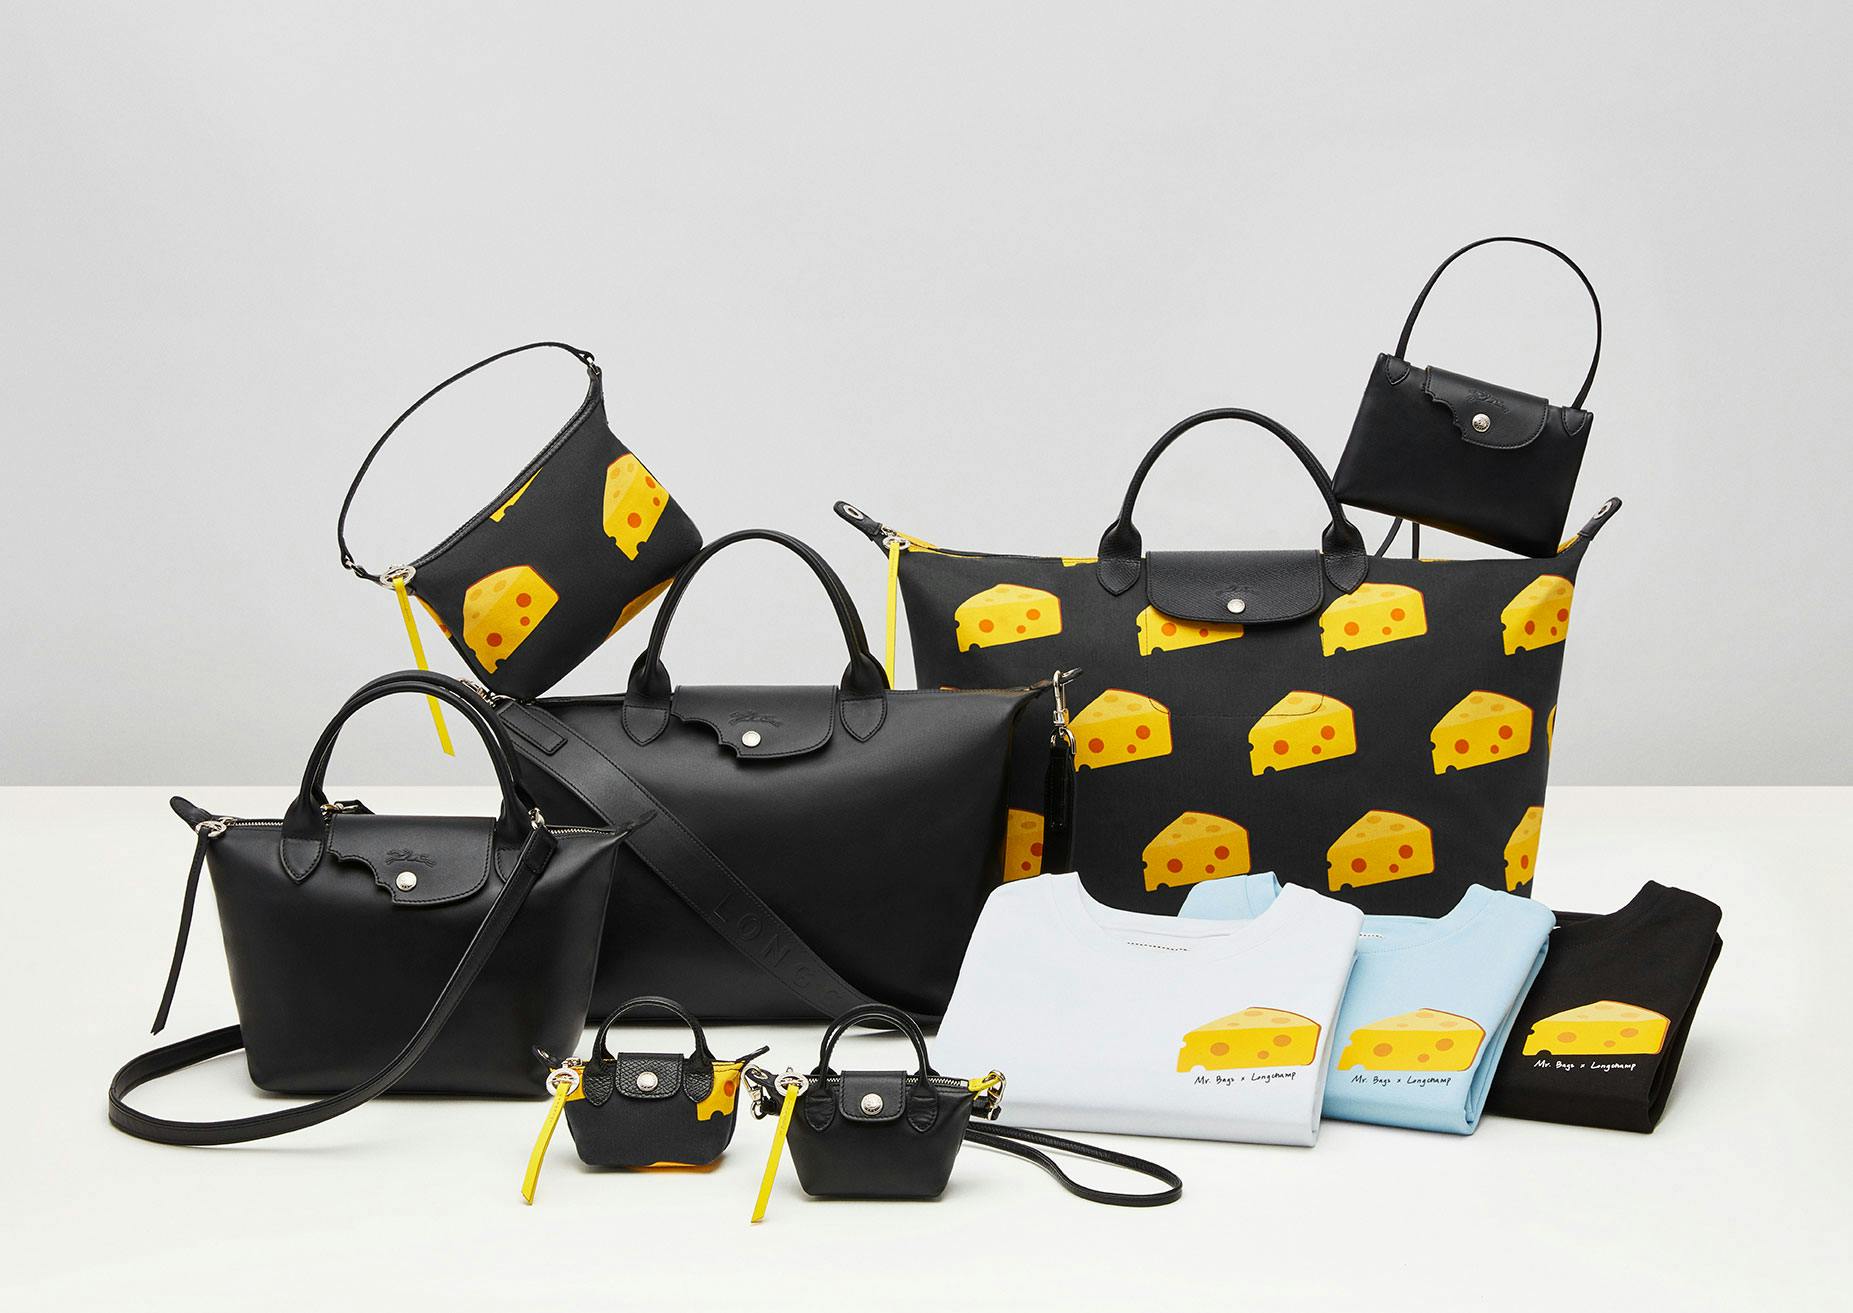 Longchamp teams up with Mr. Bags for another CNY capsule - Duty Free Hunter